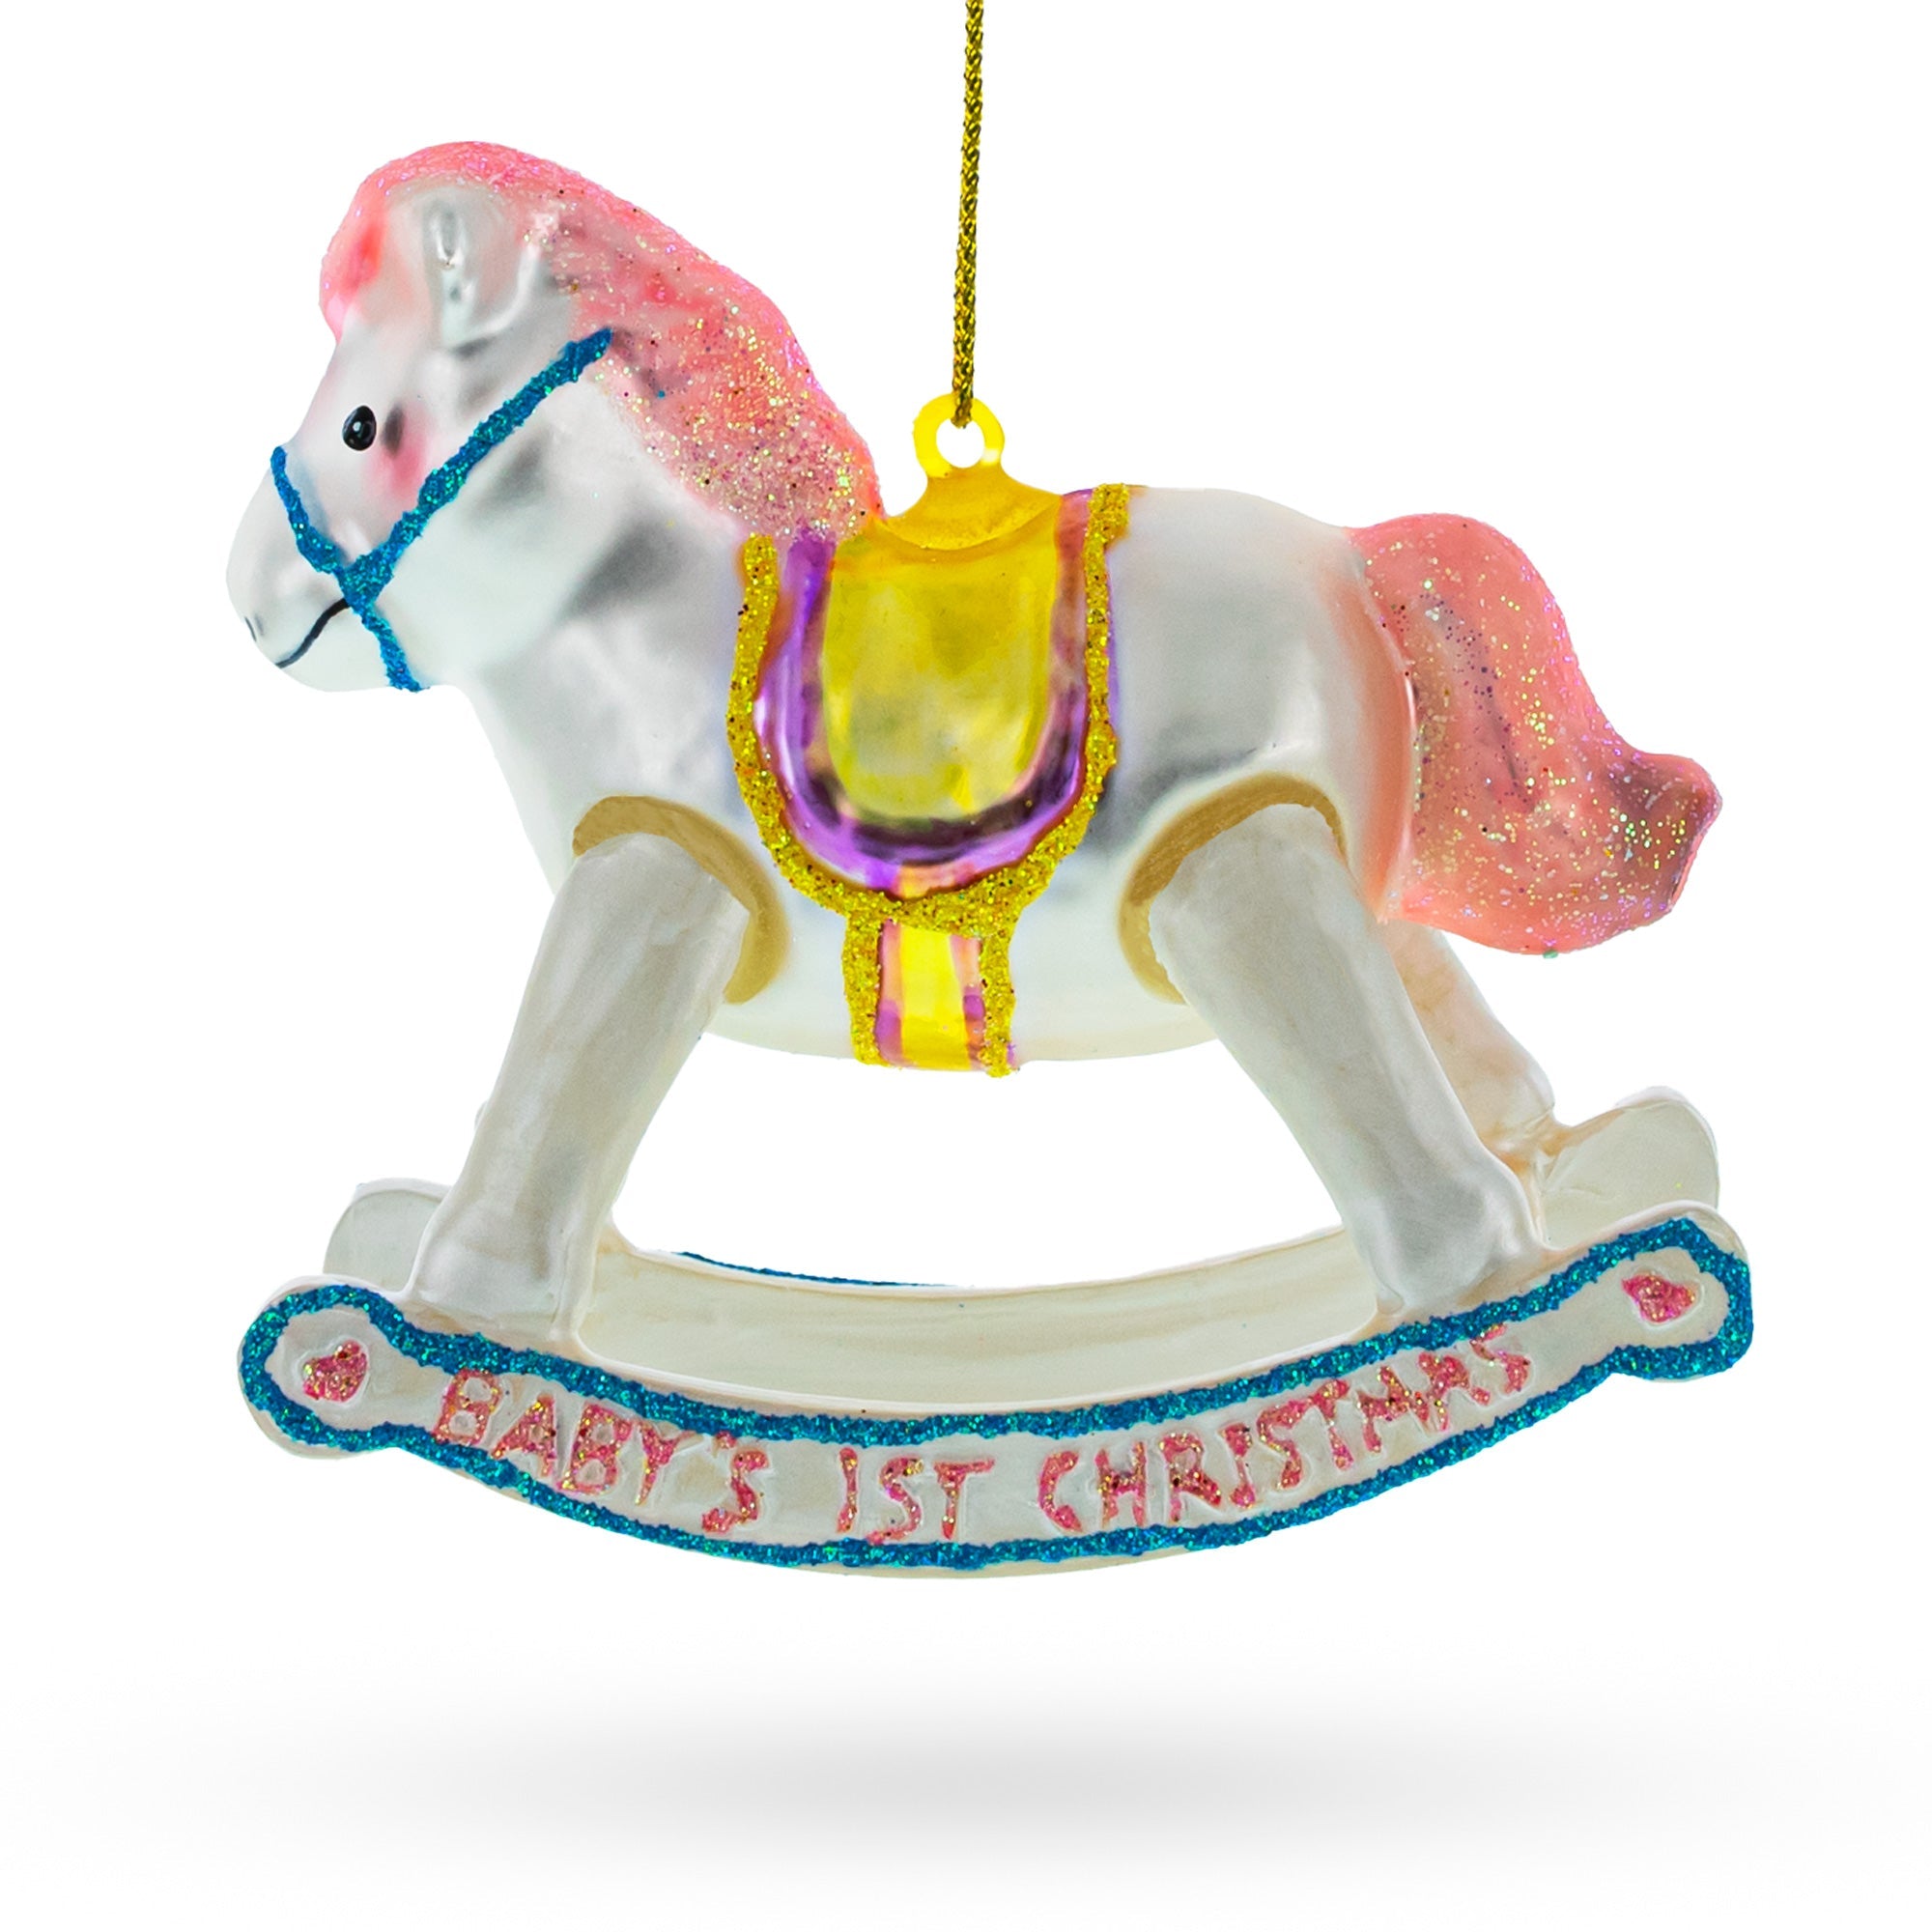 Baby Girl's Pink Rocking Horse - Lovable Blown Glass Christmas Ornament